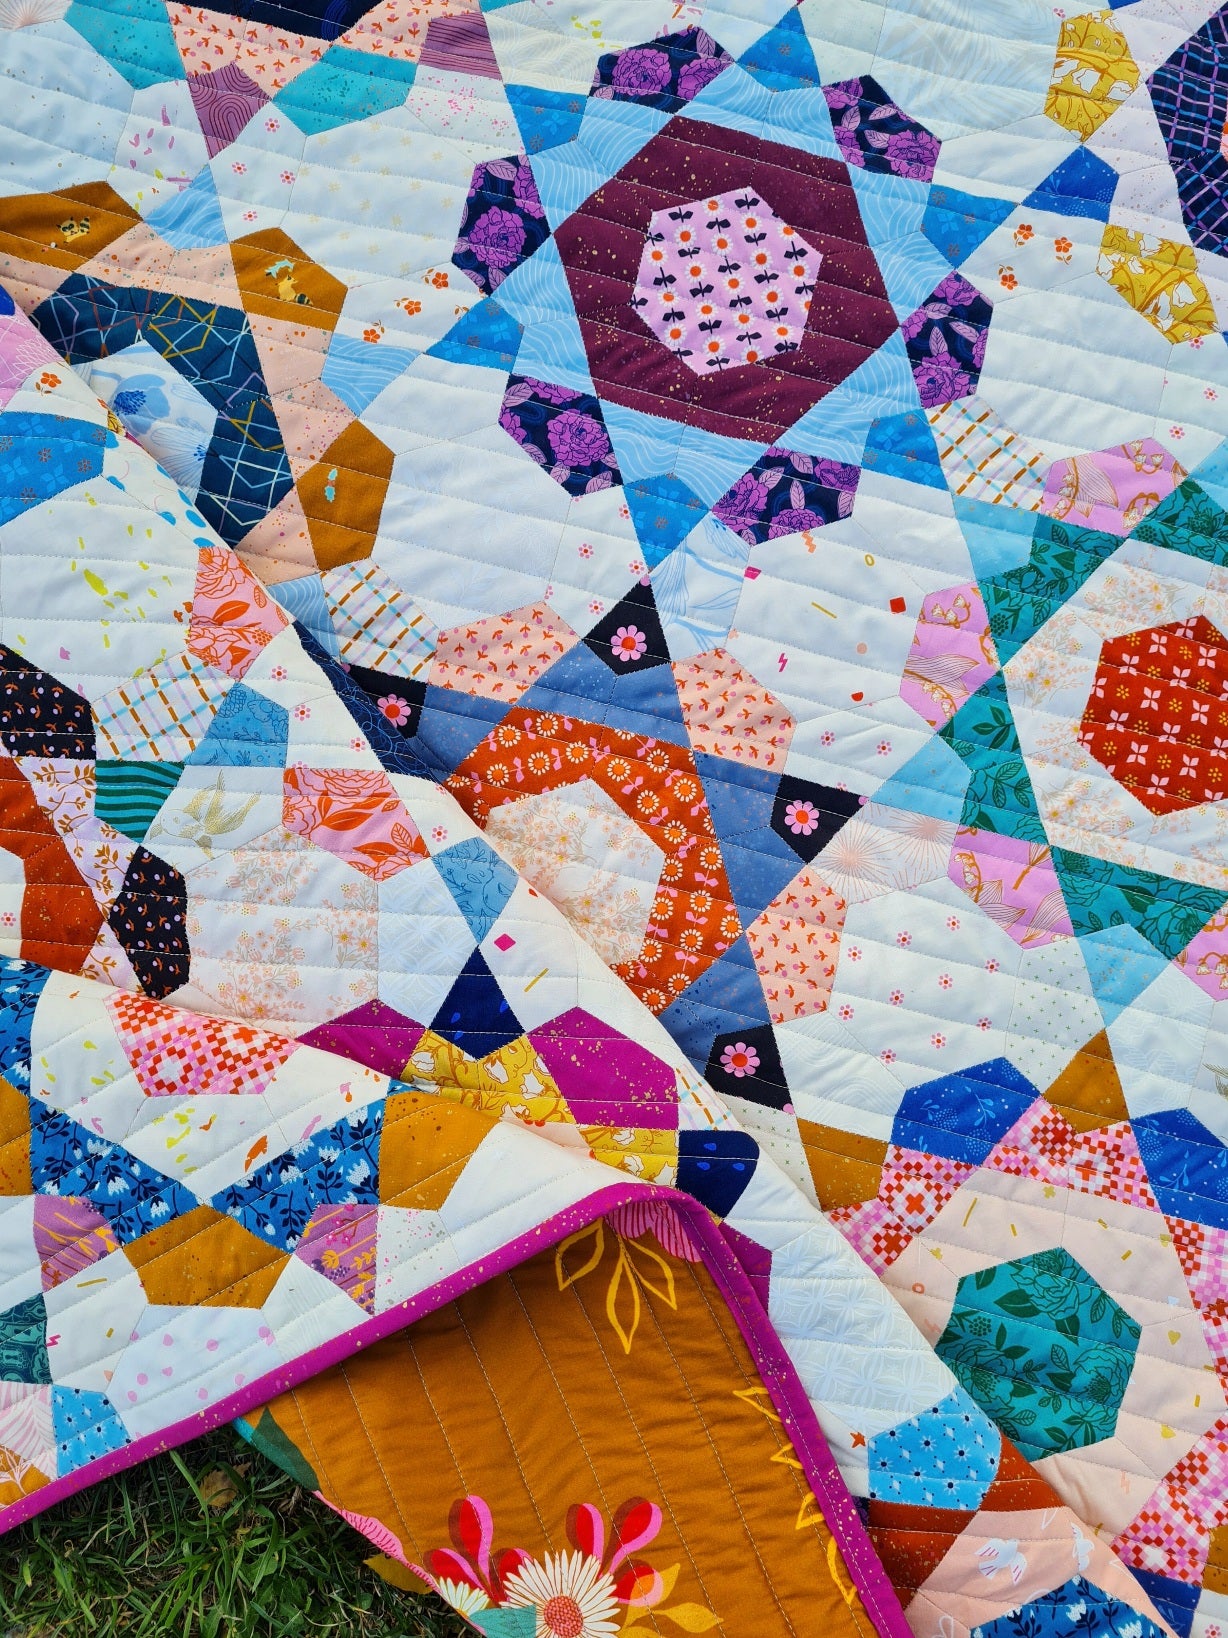 Evensong Quilt